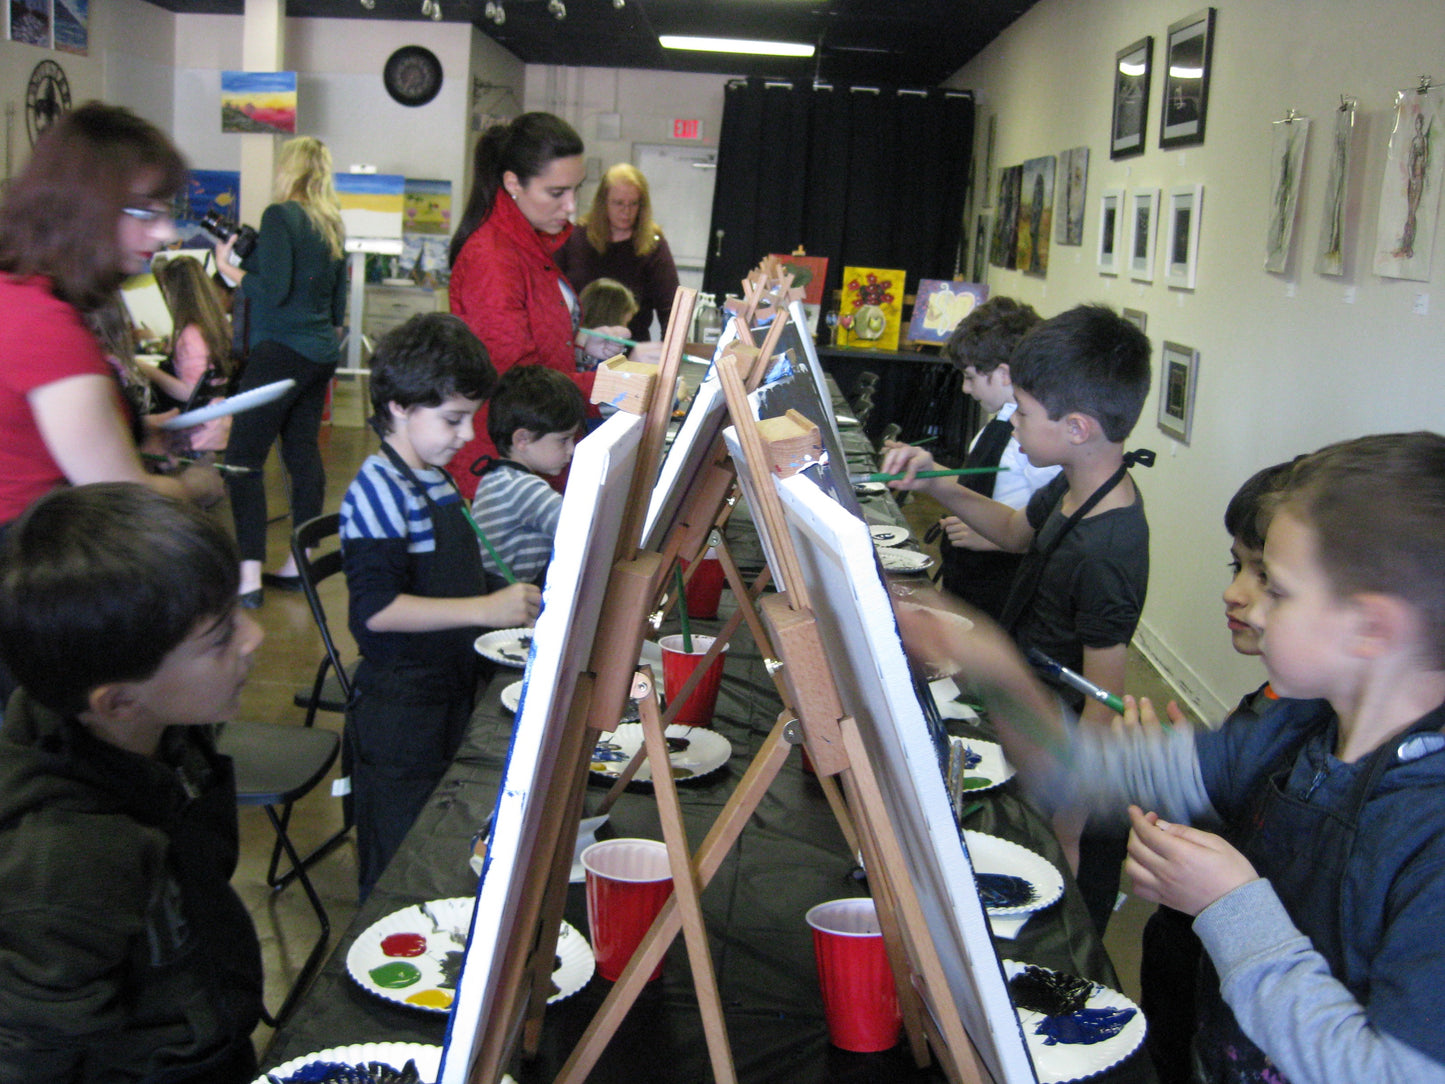 Wed, Aug 9th, 6-8P "Puppy Named Art" Private Houston Kids Painting Party